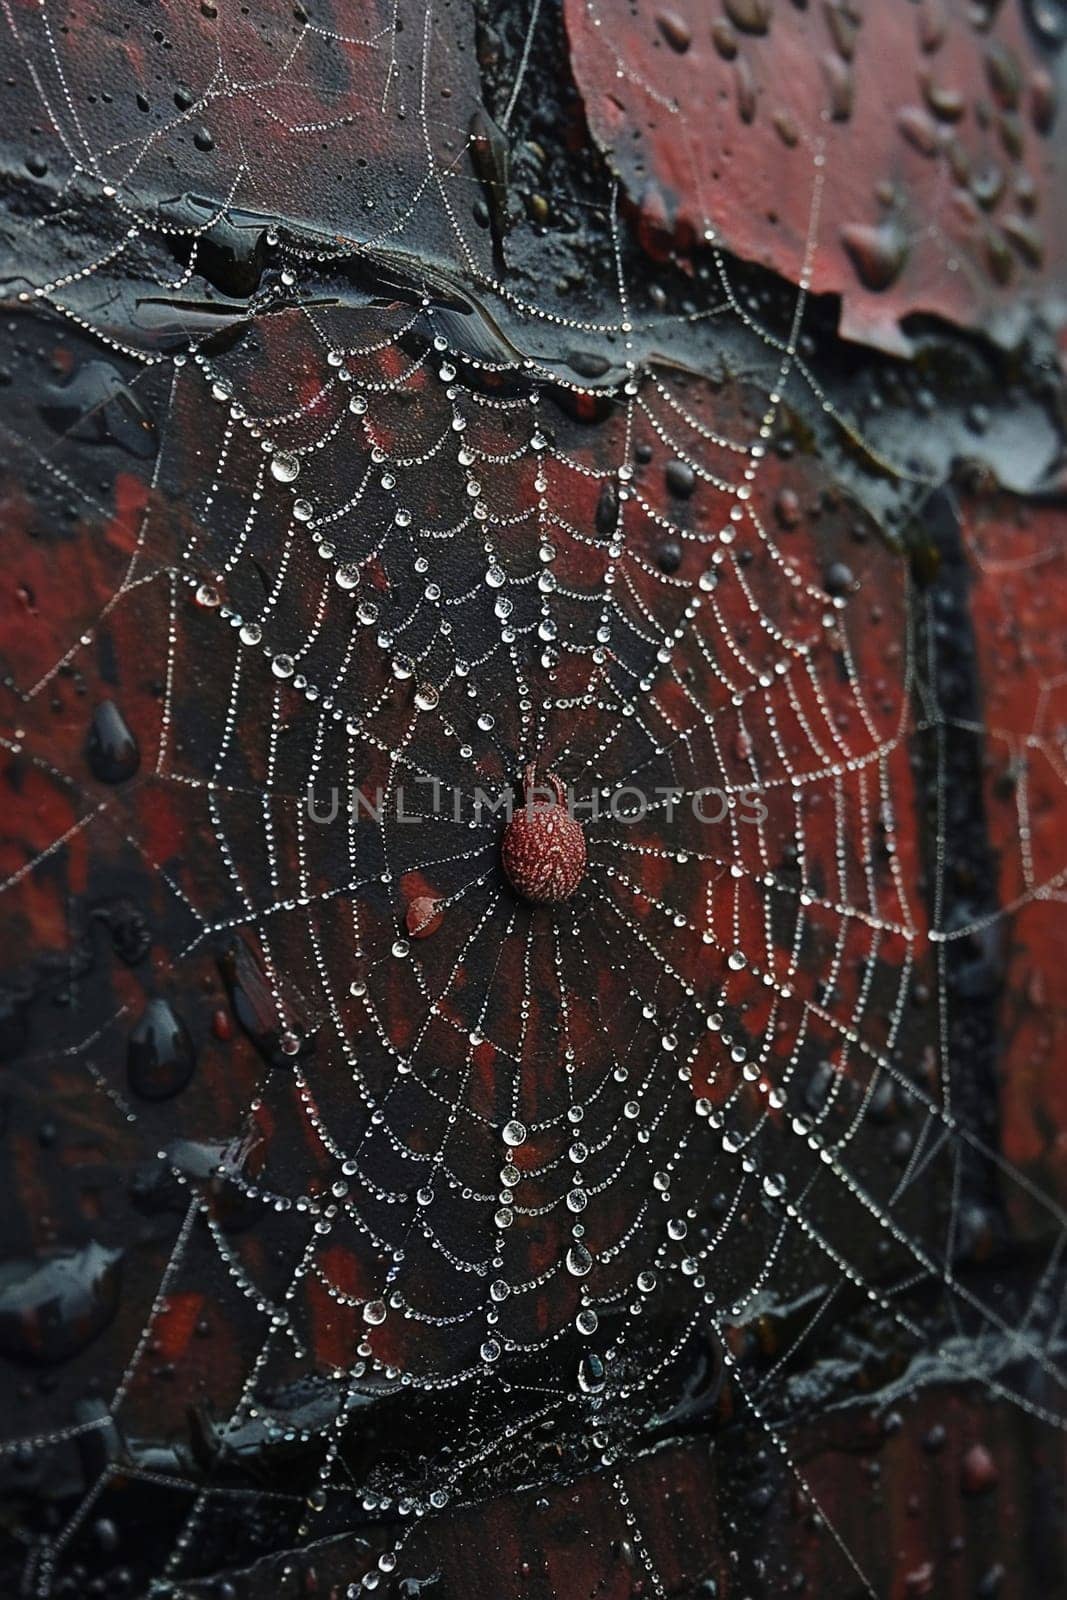 Glistening raindrops on a spider web, capturing the intricacy and beauty of nature. Old brick wall with peeling paint, great for vintage and rustic background themes.